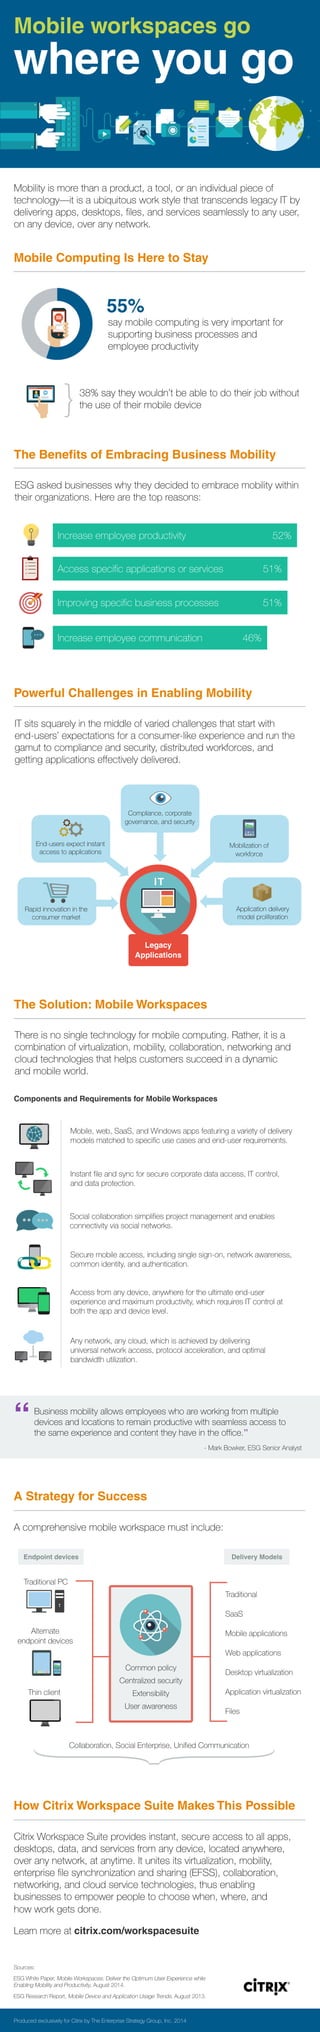 Mobile workspaces go 
where you go 
Mobility is more than a product, a tool, or an individual piece of 
technology—it is a ubiquitous work style that transcends legacy IT by 
delivering apps, desktops, files, and services seamlessly to any user, 
on any device, over any network. 
Mobile Computing Is Here to Stay 
55% 
say mobile computing is very important for 
supporting business processes and 
employee productivity 
} 
38% say they wouldn’t be able to do their job without 
the use of their mobile device 
The Benefits of Embracing Business Mobility 
ESG asked businesses why they decided to embrace mobility within 
their organizations. Here are the top reasons: 
Increase employee productivity 52% 
Access specific applications or services 51% 
Improving specific business processes 51% 
Increase employee communication 46% 
Powerful Challenges in Enabling Mobility 
IT sits squarely in the middle of varied challenges that start with 
end-users’ expectations for a consumer-like experience and run the 
gamut to compliance and security, distributed workforces, and 
getting applications effectively delivered. 
End-users expect instant 
access to applications 
Rapid innovation in the 
consumer market 
Compliance, corporate 
governance, and security 
Mobilization of 
workforce 
Application delivery 
model proliferation 
IT 
The Solution: Mobile Workspaces 
There is no single technology for mobile computing. Rather, it is a 
combination of virtualization, mobility, collaboration, networking and 
cloud technologies that helps customers succeed in a dynamic 
and mobile world. 
Social collaboration simplifies project management and enables 
connectivity via social networks. 
Business mobility allows employees who are working from multiple 
devices and locations to remain productive with seamless access to 
the same experience and content they have in the office.” 
A Strategy for Success 
Endpoint devices Delivery Models 
Traditional PC 
Mobile, web, SaaS, and Windows apps featuring a variety of delivery 
models matched to specific use cases and end-user requirements. 
Instant file and sync for secure corporate data access, IT control, 
and data protection. 
Secure mobile access, including single sign-on, network awareness, 
common identity, and authentication. 
Access from any device, anywhere for the ultimate end-user 
experience and maximum productivity, which requires IT control at 
both the app and device level. 
Any network, any cloud, which is achieved by delivering 
universal network access, protocol acceleration, and optimal 
bandwidth utilization. 
- Mark Bowker, ESG Senior Analyst 
Traditional 
SaaS 
Mobile applications 
Web applications 
Desktop virtualization 
Application virtualization 
FFiilleess 
Alternate 
endpoint devices 
Common policy 
Centralized security 
Extensibility 
User awareness 
Collaboration, Social Enterprise, Unified Communication 
“ 
A comprehensive mobile workspace must include: 
Thin client 
How Citrix Workspace Suite Makes This Possible 
Citrix Workspace Suite provides instant, secure access to all apps, 
desktops, data, and services from any device, located anywhere, 
over any network, at anytime. It unites its virtualization, mobility, 
enterprise file synchronization and sharing (EFSS), collaboration, 
networking, and cloud service technologies, thus enabling 
businesses to empower people to choose when, where, and 
how work gets done. 
Sources: 
Legacy 
Applications 
Components and Requirements for Mobile Workspaces 
Learn more at citrix.com/workspacesuite 
Produced exclusively for Citrix by The Enterprise Strategy Group, Inc. 2014 
